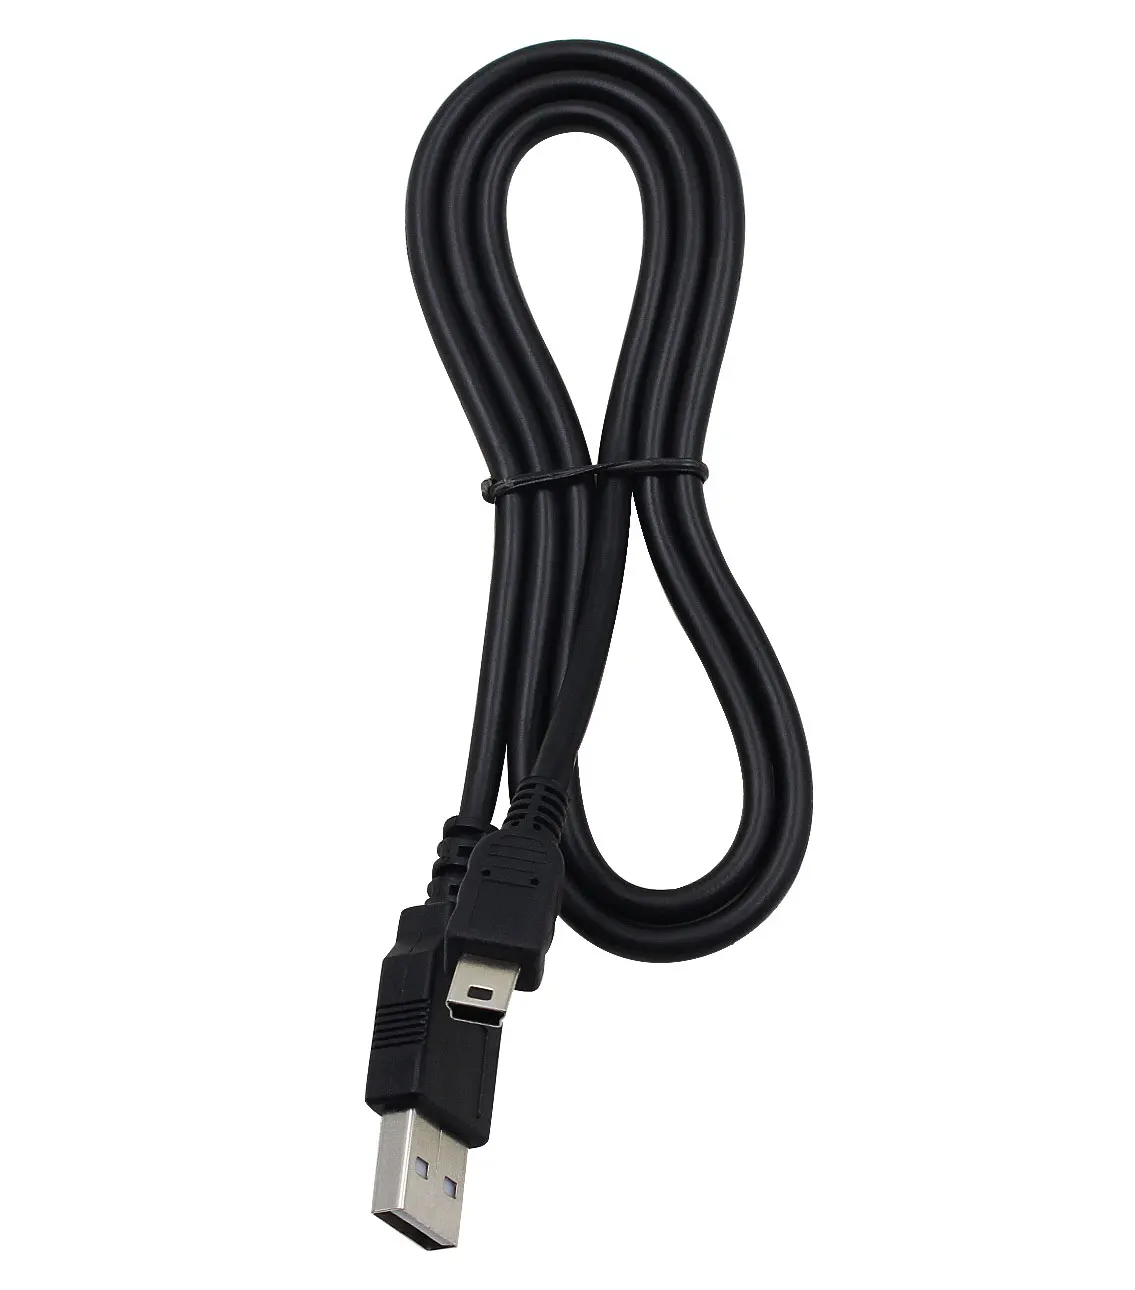 USB Charge Data Cable Compatible with  Zoom H1 HI Handy Recorder Handy Recorder 